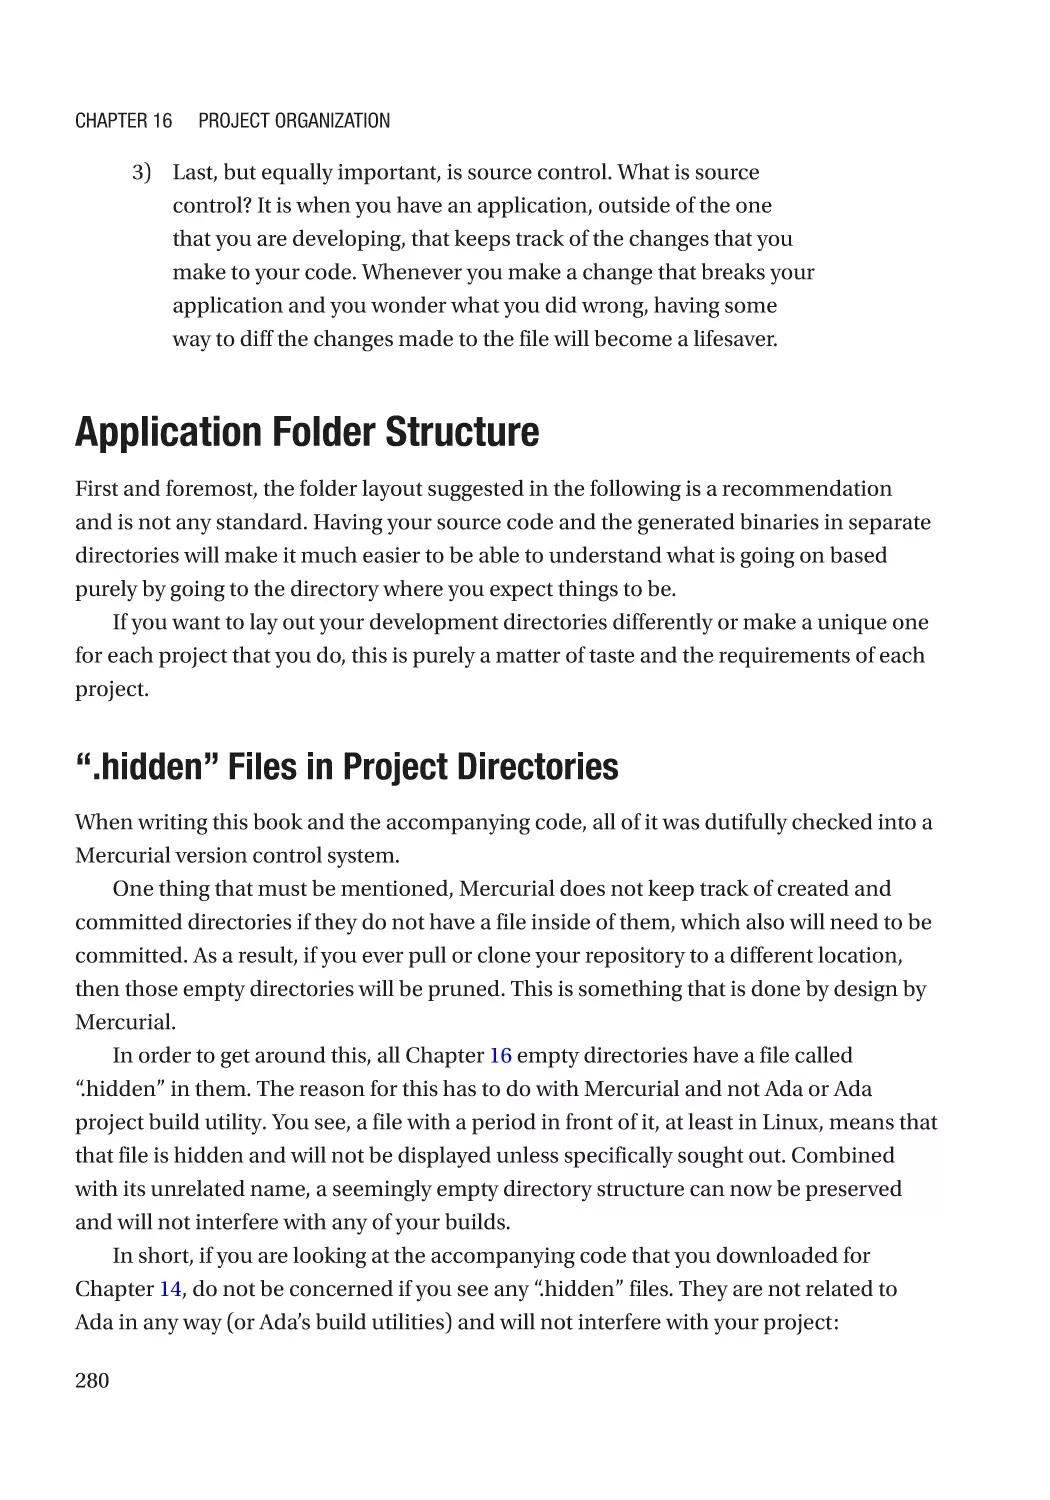 Application Folder Structure
“.hidden” Files in Project Directories